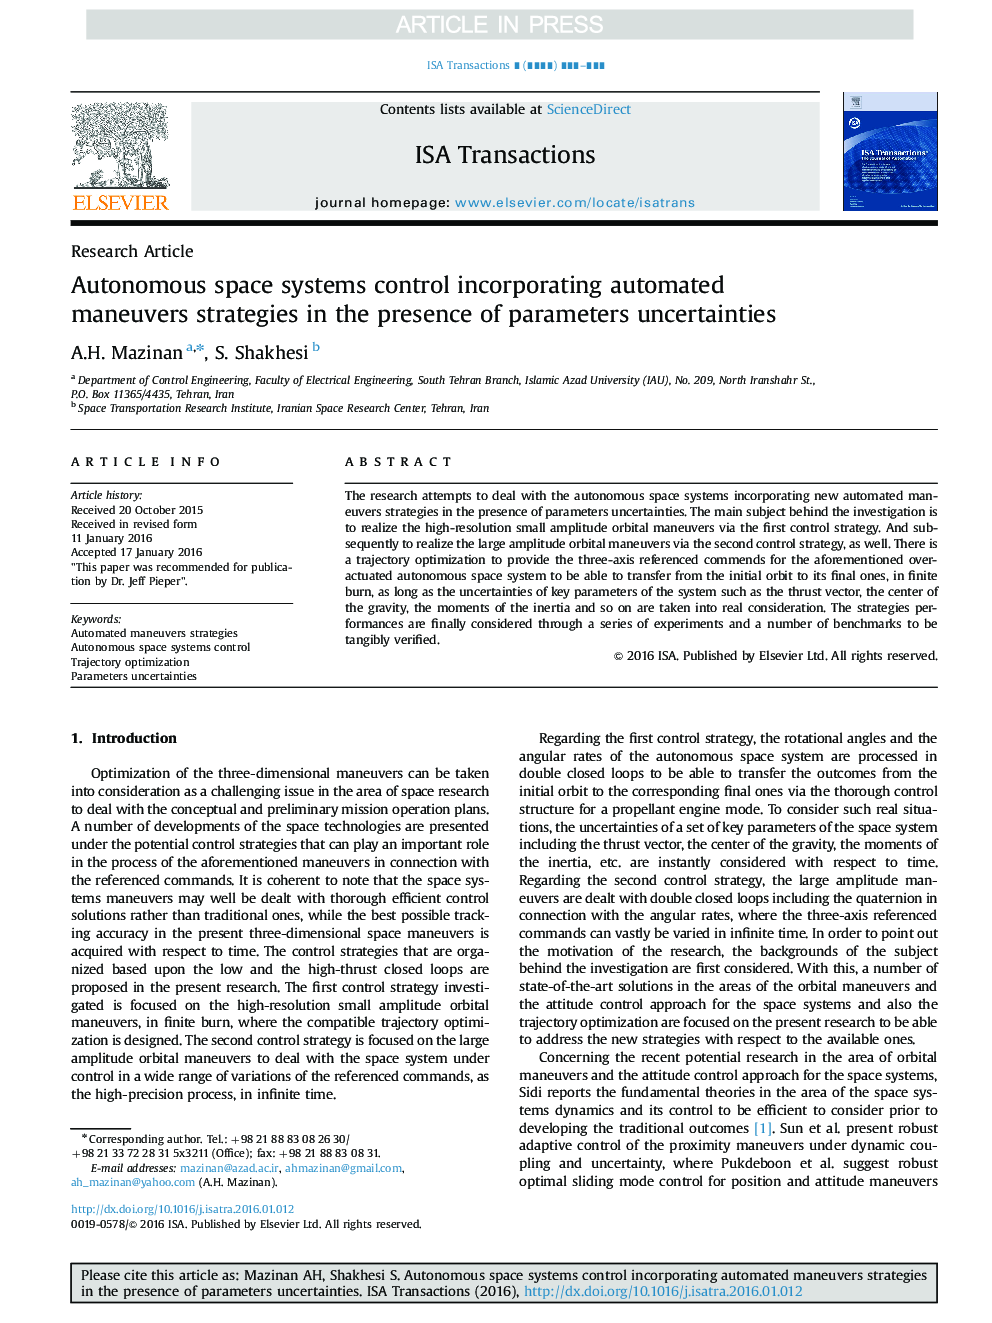 Autonomous space systems control incorporating automated maneuvers strategies in the presence of parameters uncertainties